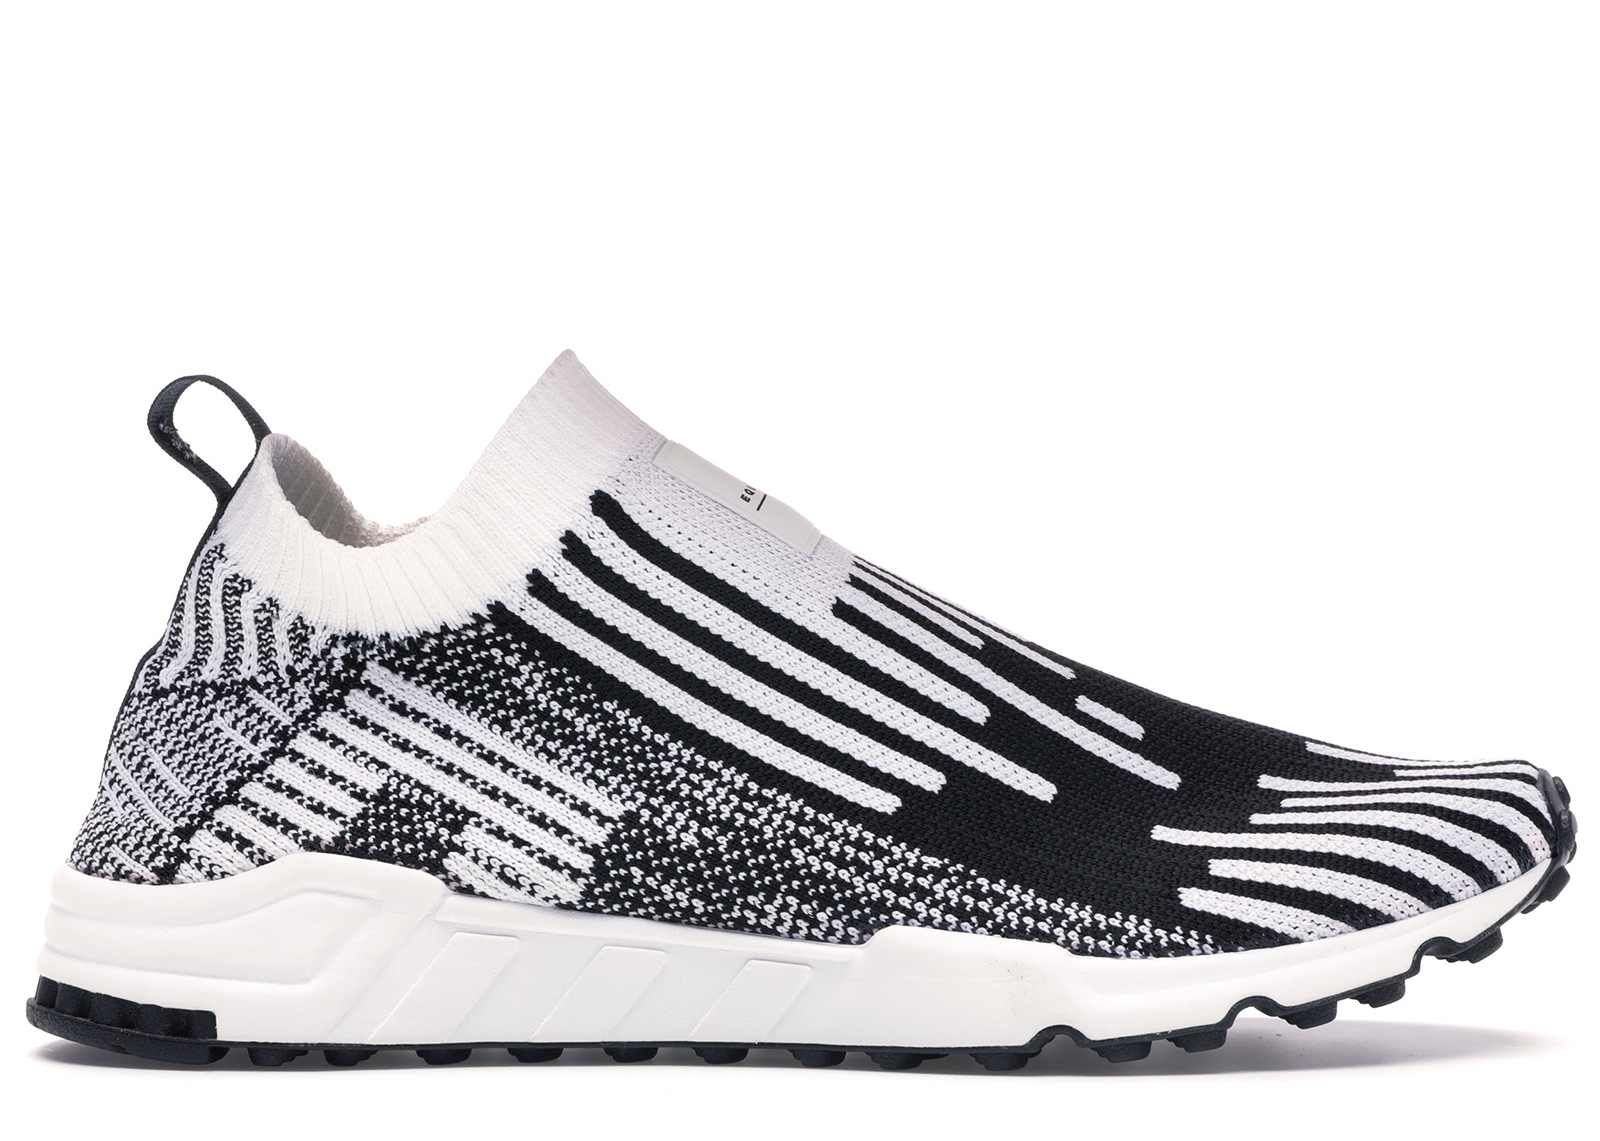 adidas eqt support sock trainers